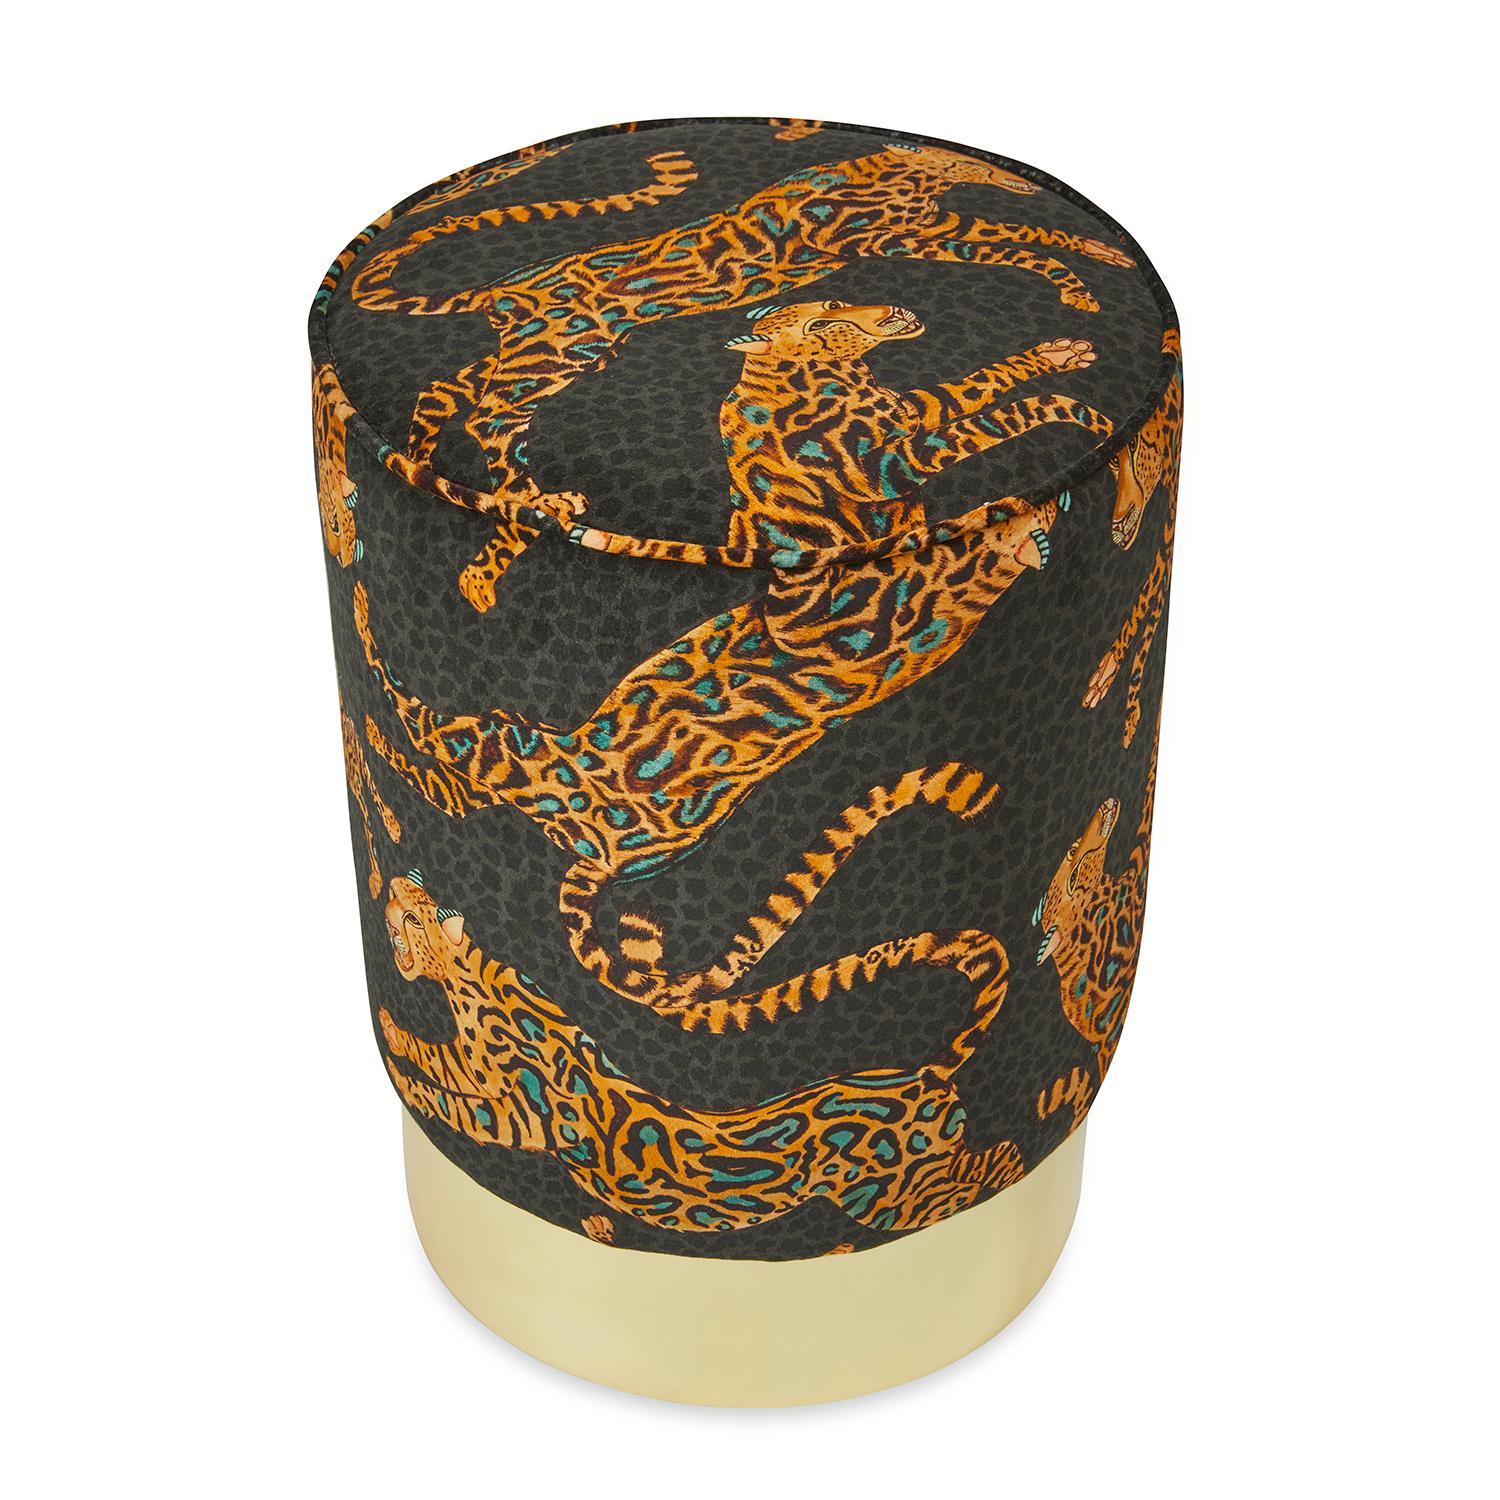 A luxurious cheetah kings gold velvet fabric covered Pouff with a brass base.

Product Information
Dimensions: 15